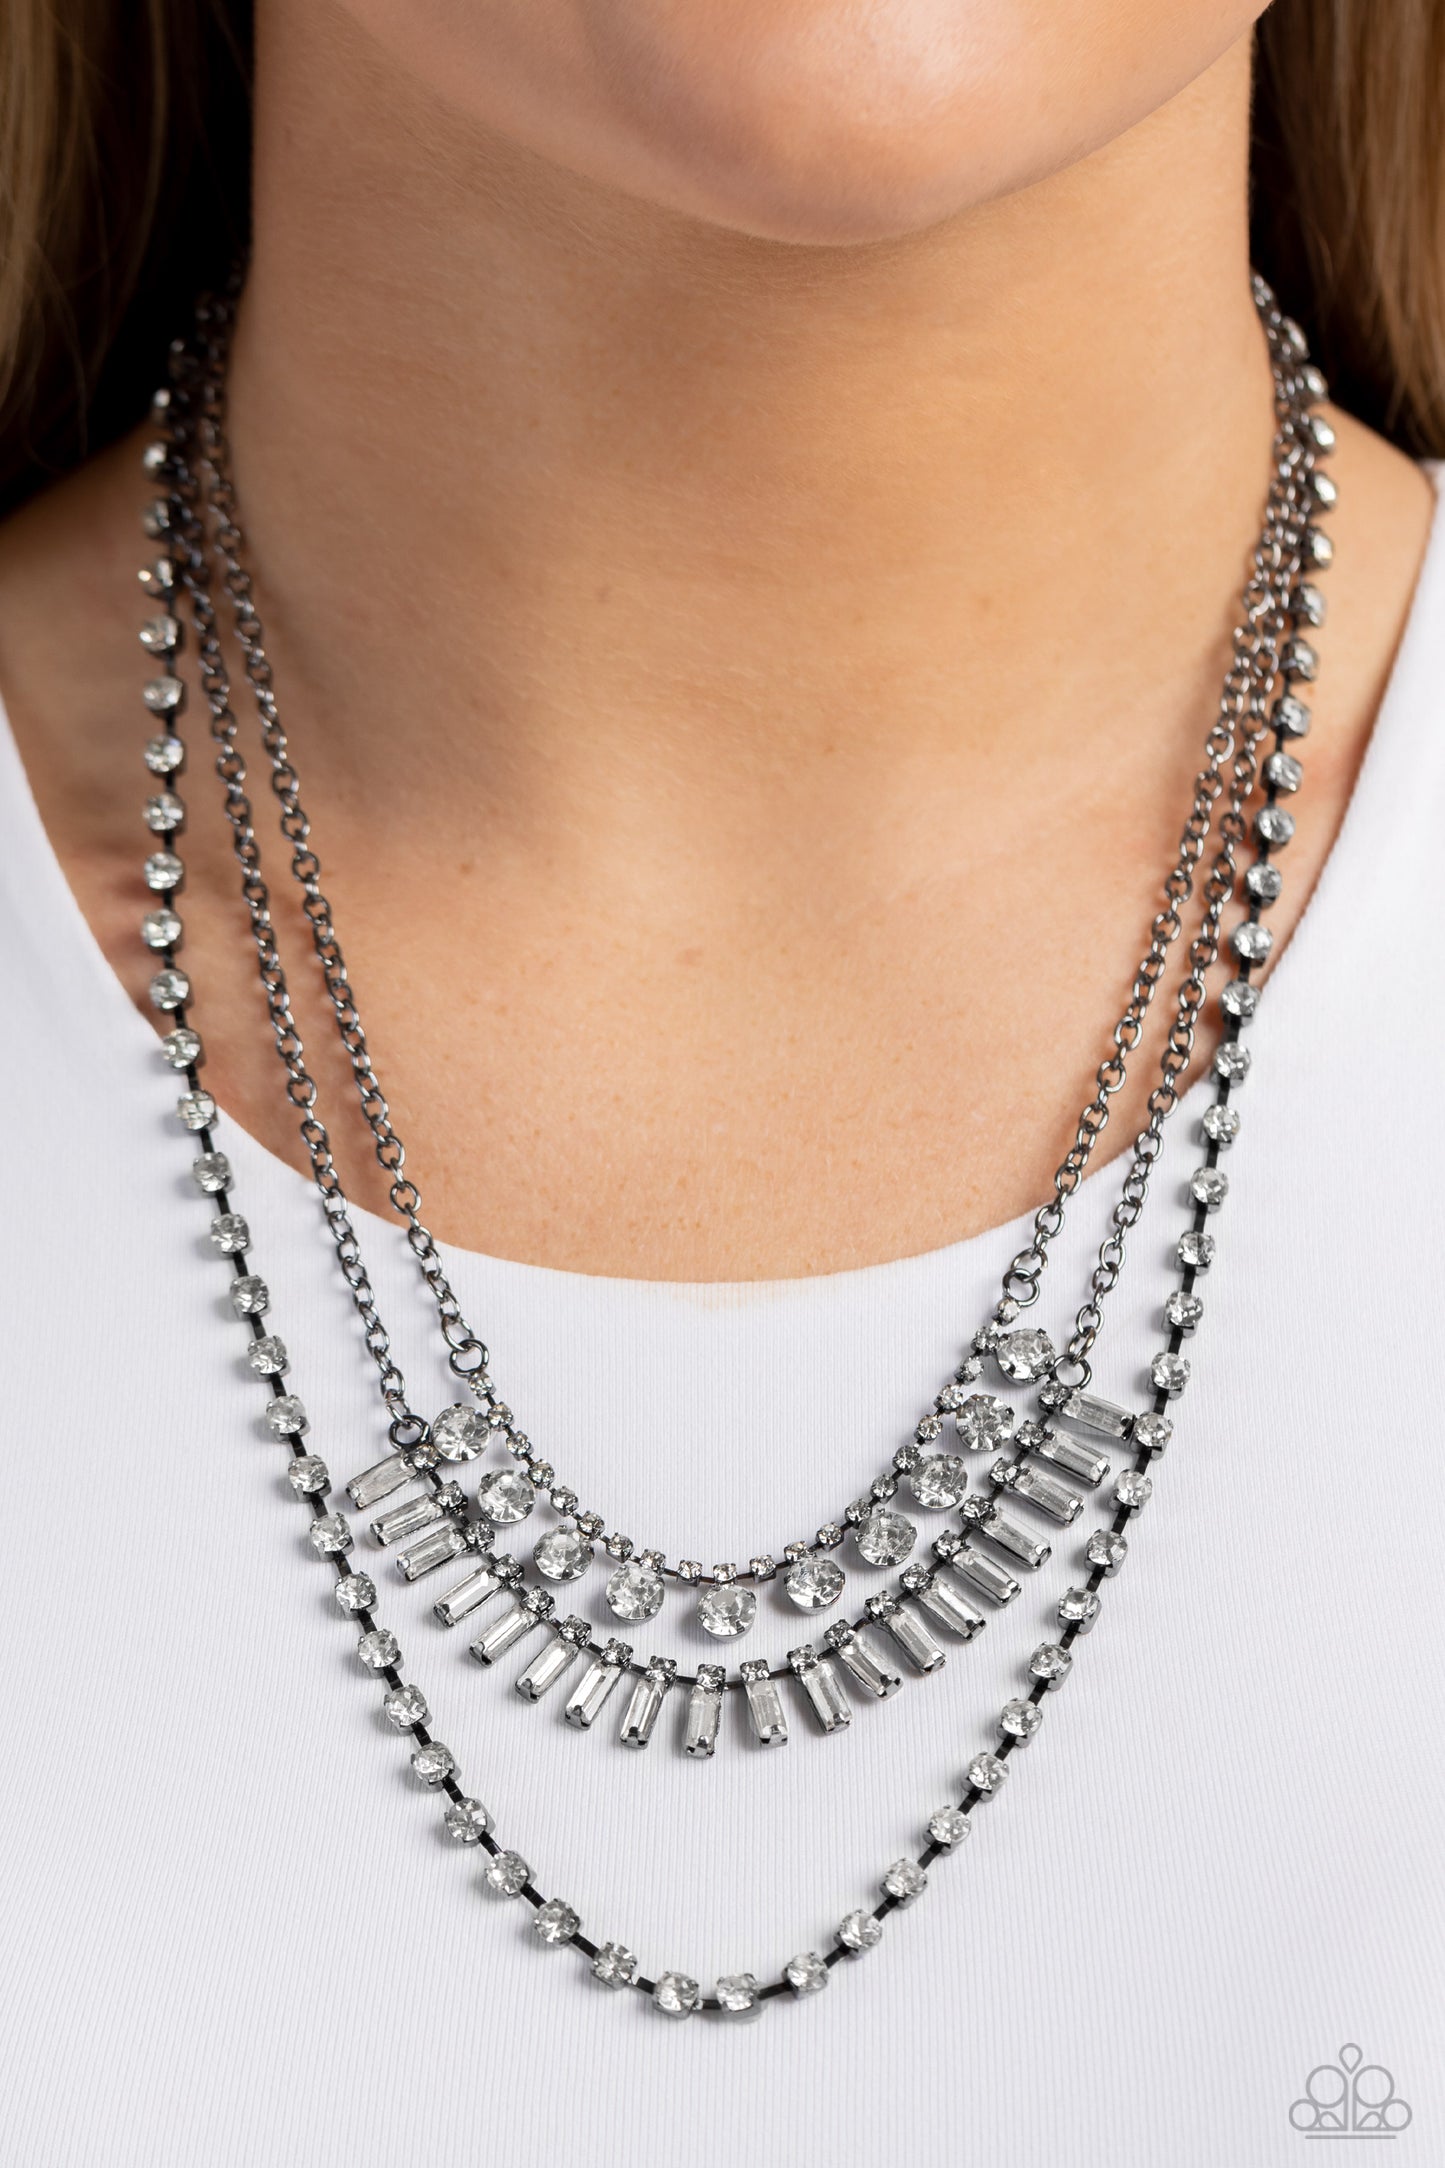 Paparazzi Accessories Dripping in Stardust - Black Three gunmetal chains fall into haphazard layers across the chest, creating a radiantly edgy display. On the uppermost chain, a row of solitaire rhinestones emerges from a section of small, white, square-